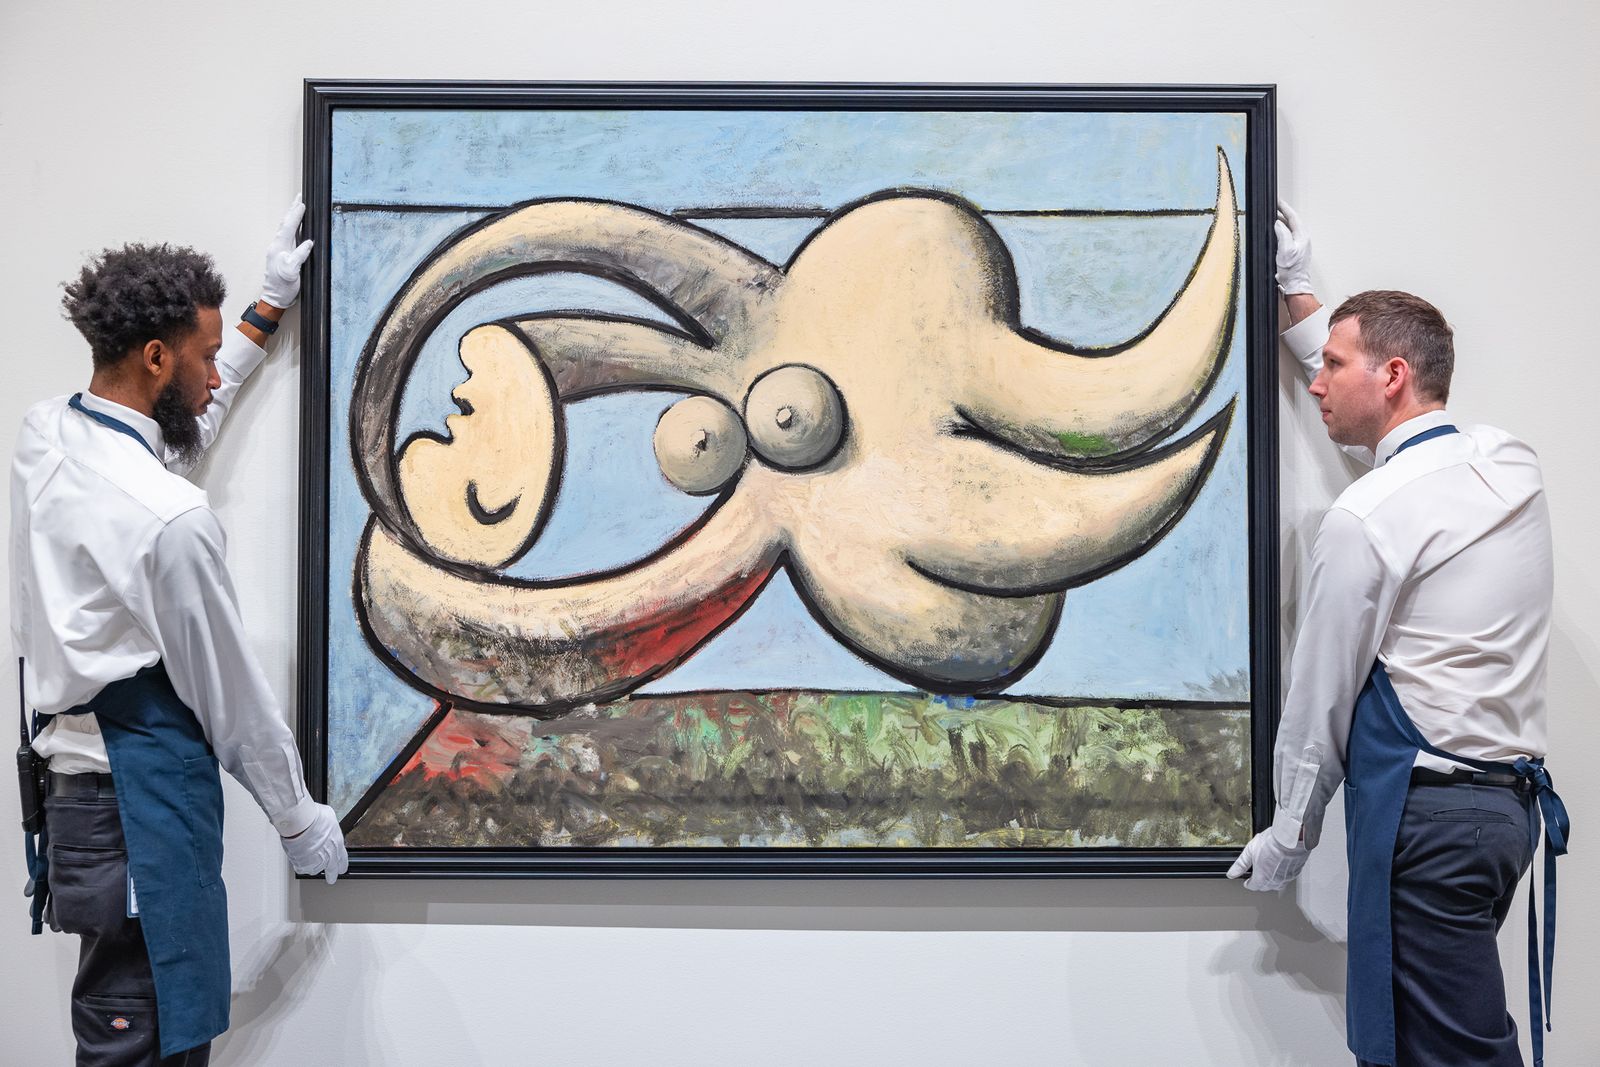 A Painting of Picasso’s Mistress Muse Just Sold for $67.5 Million